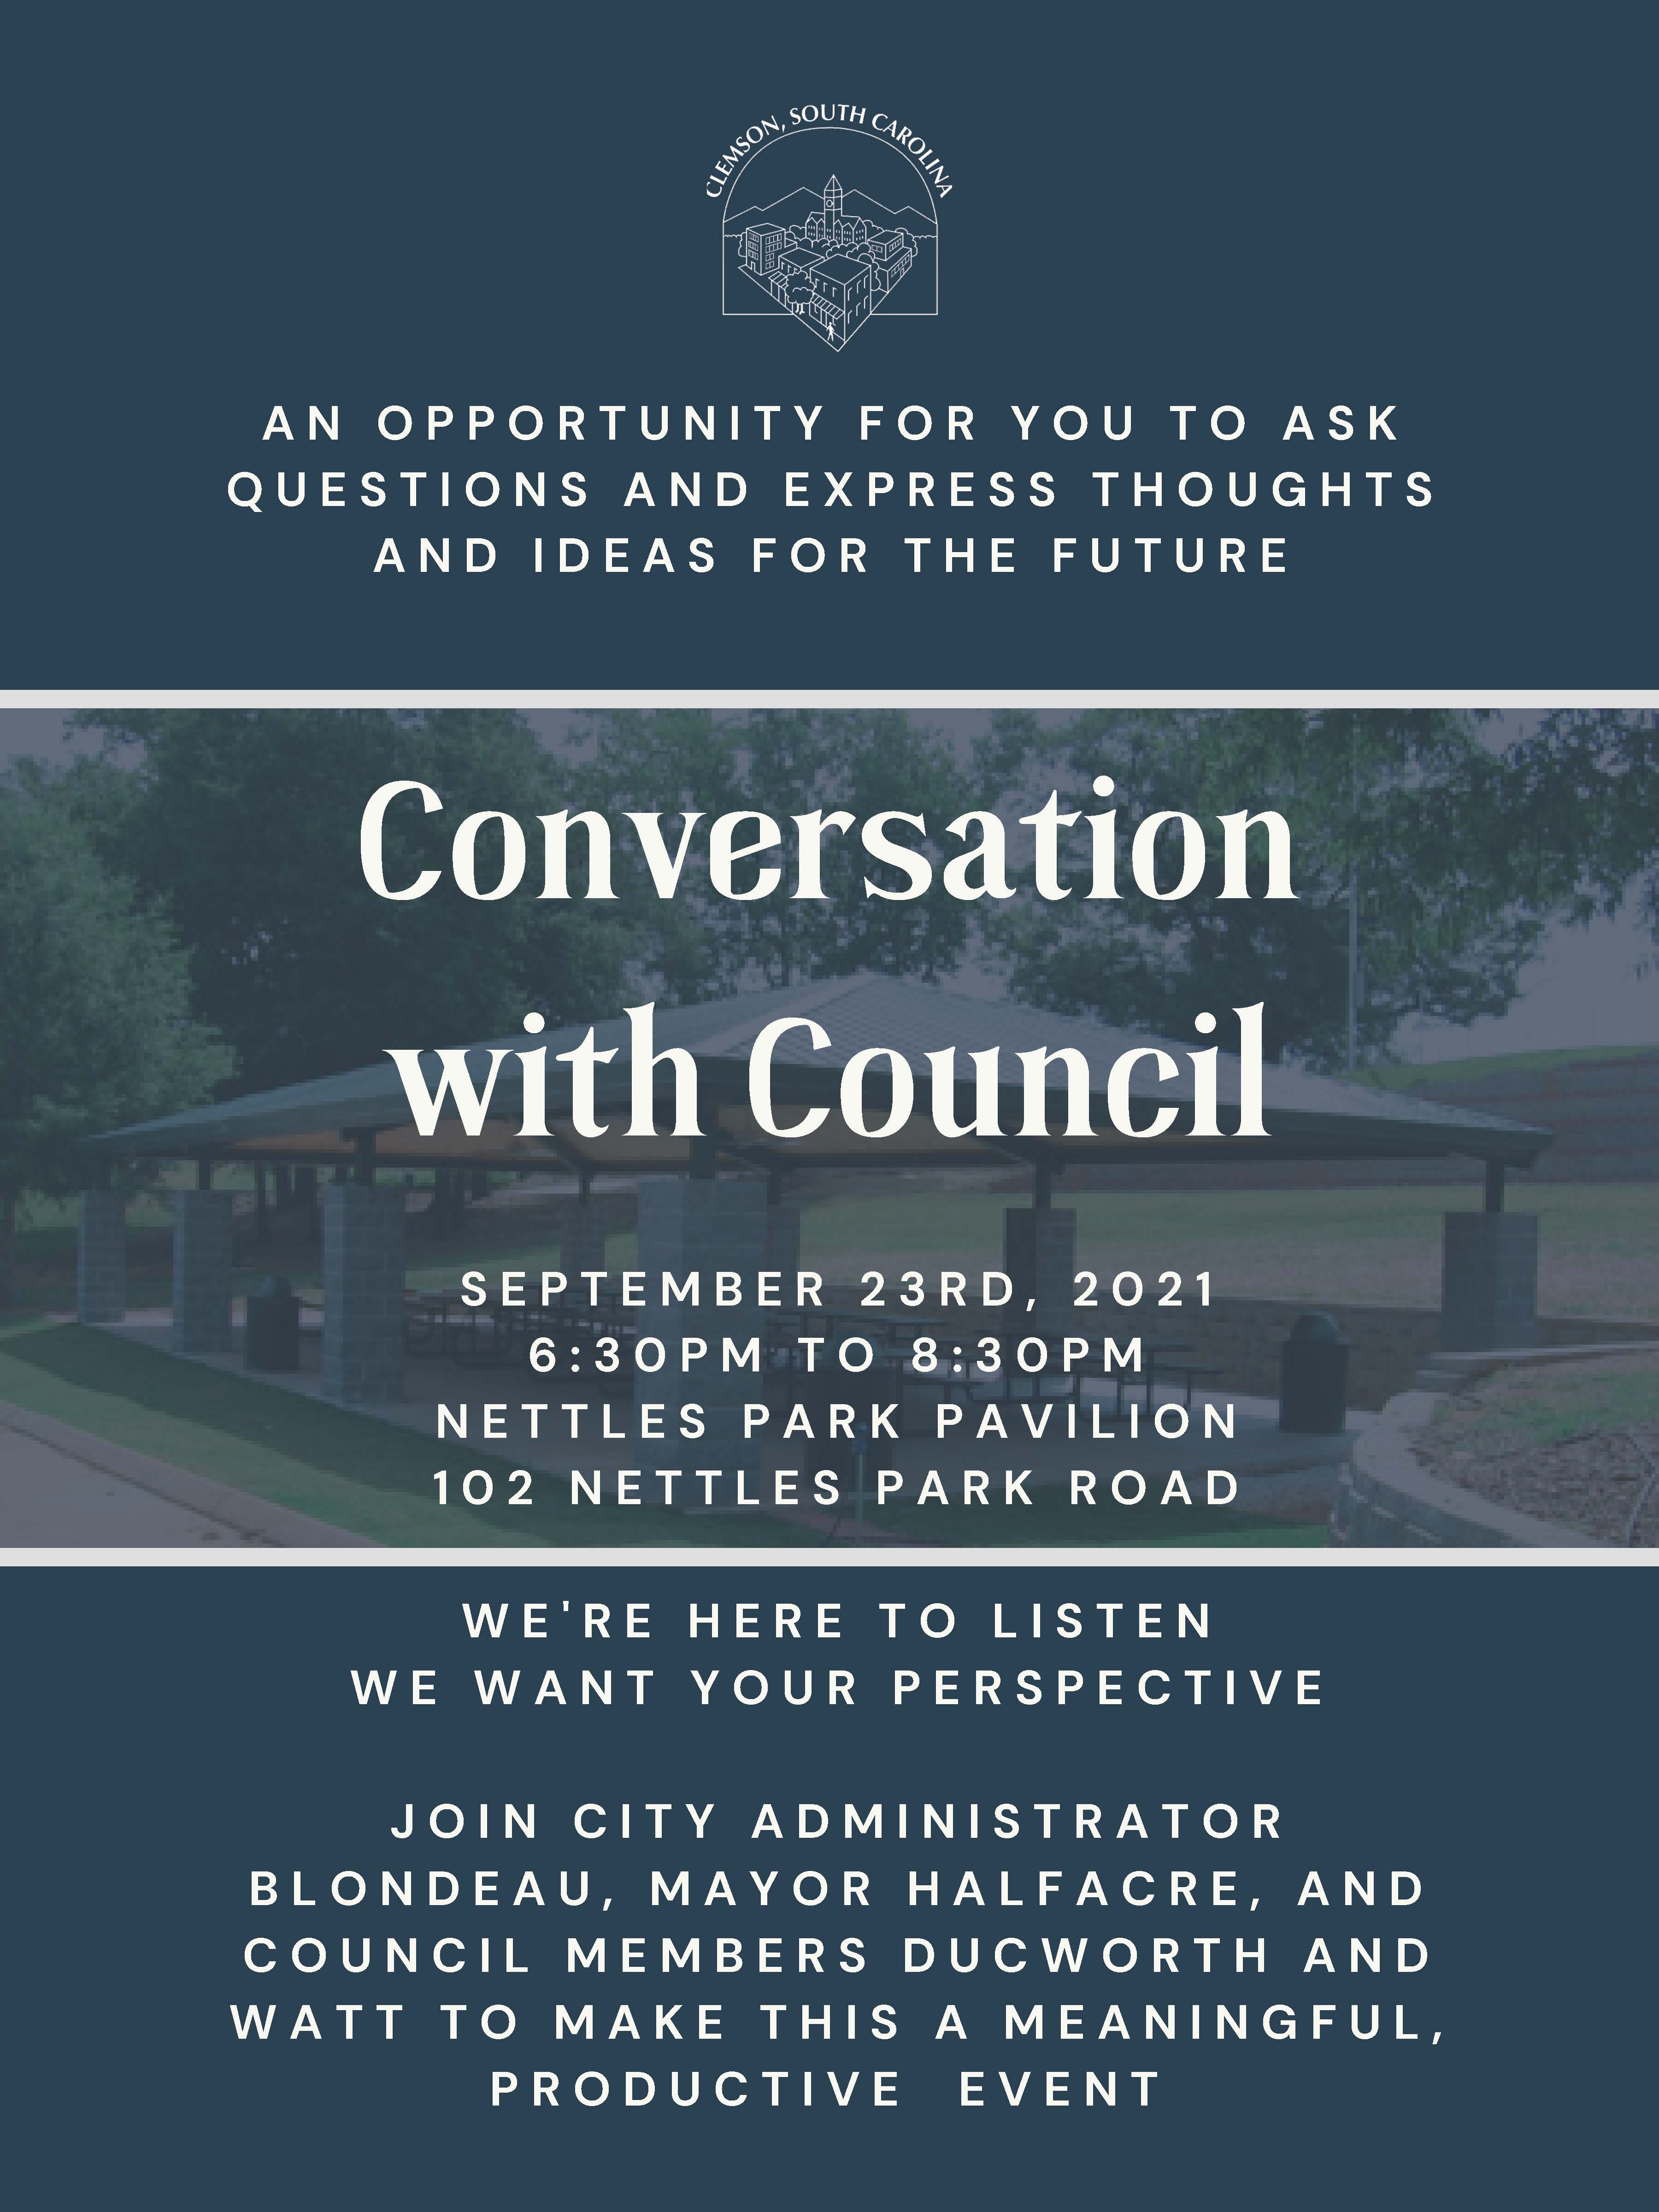 Conversations with Council September 23rd at Nettles Park